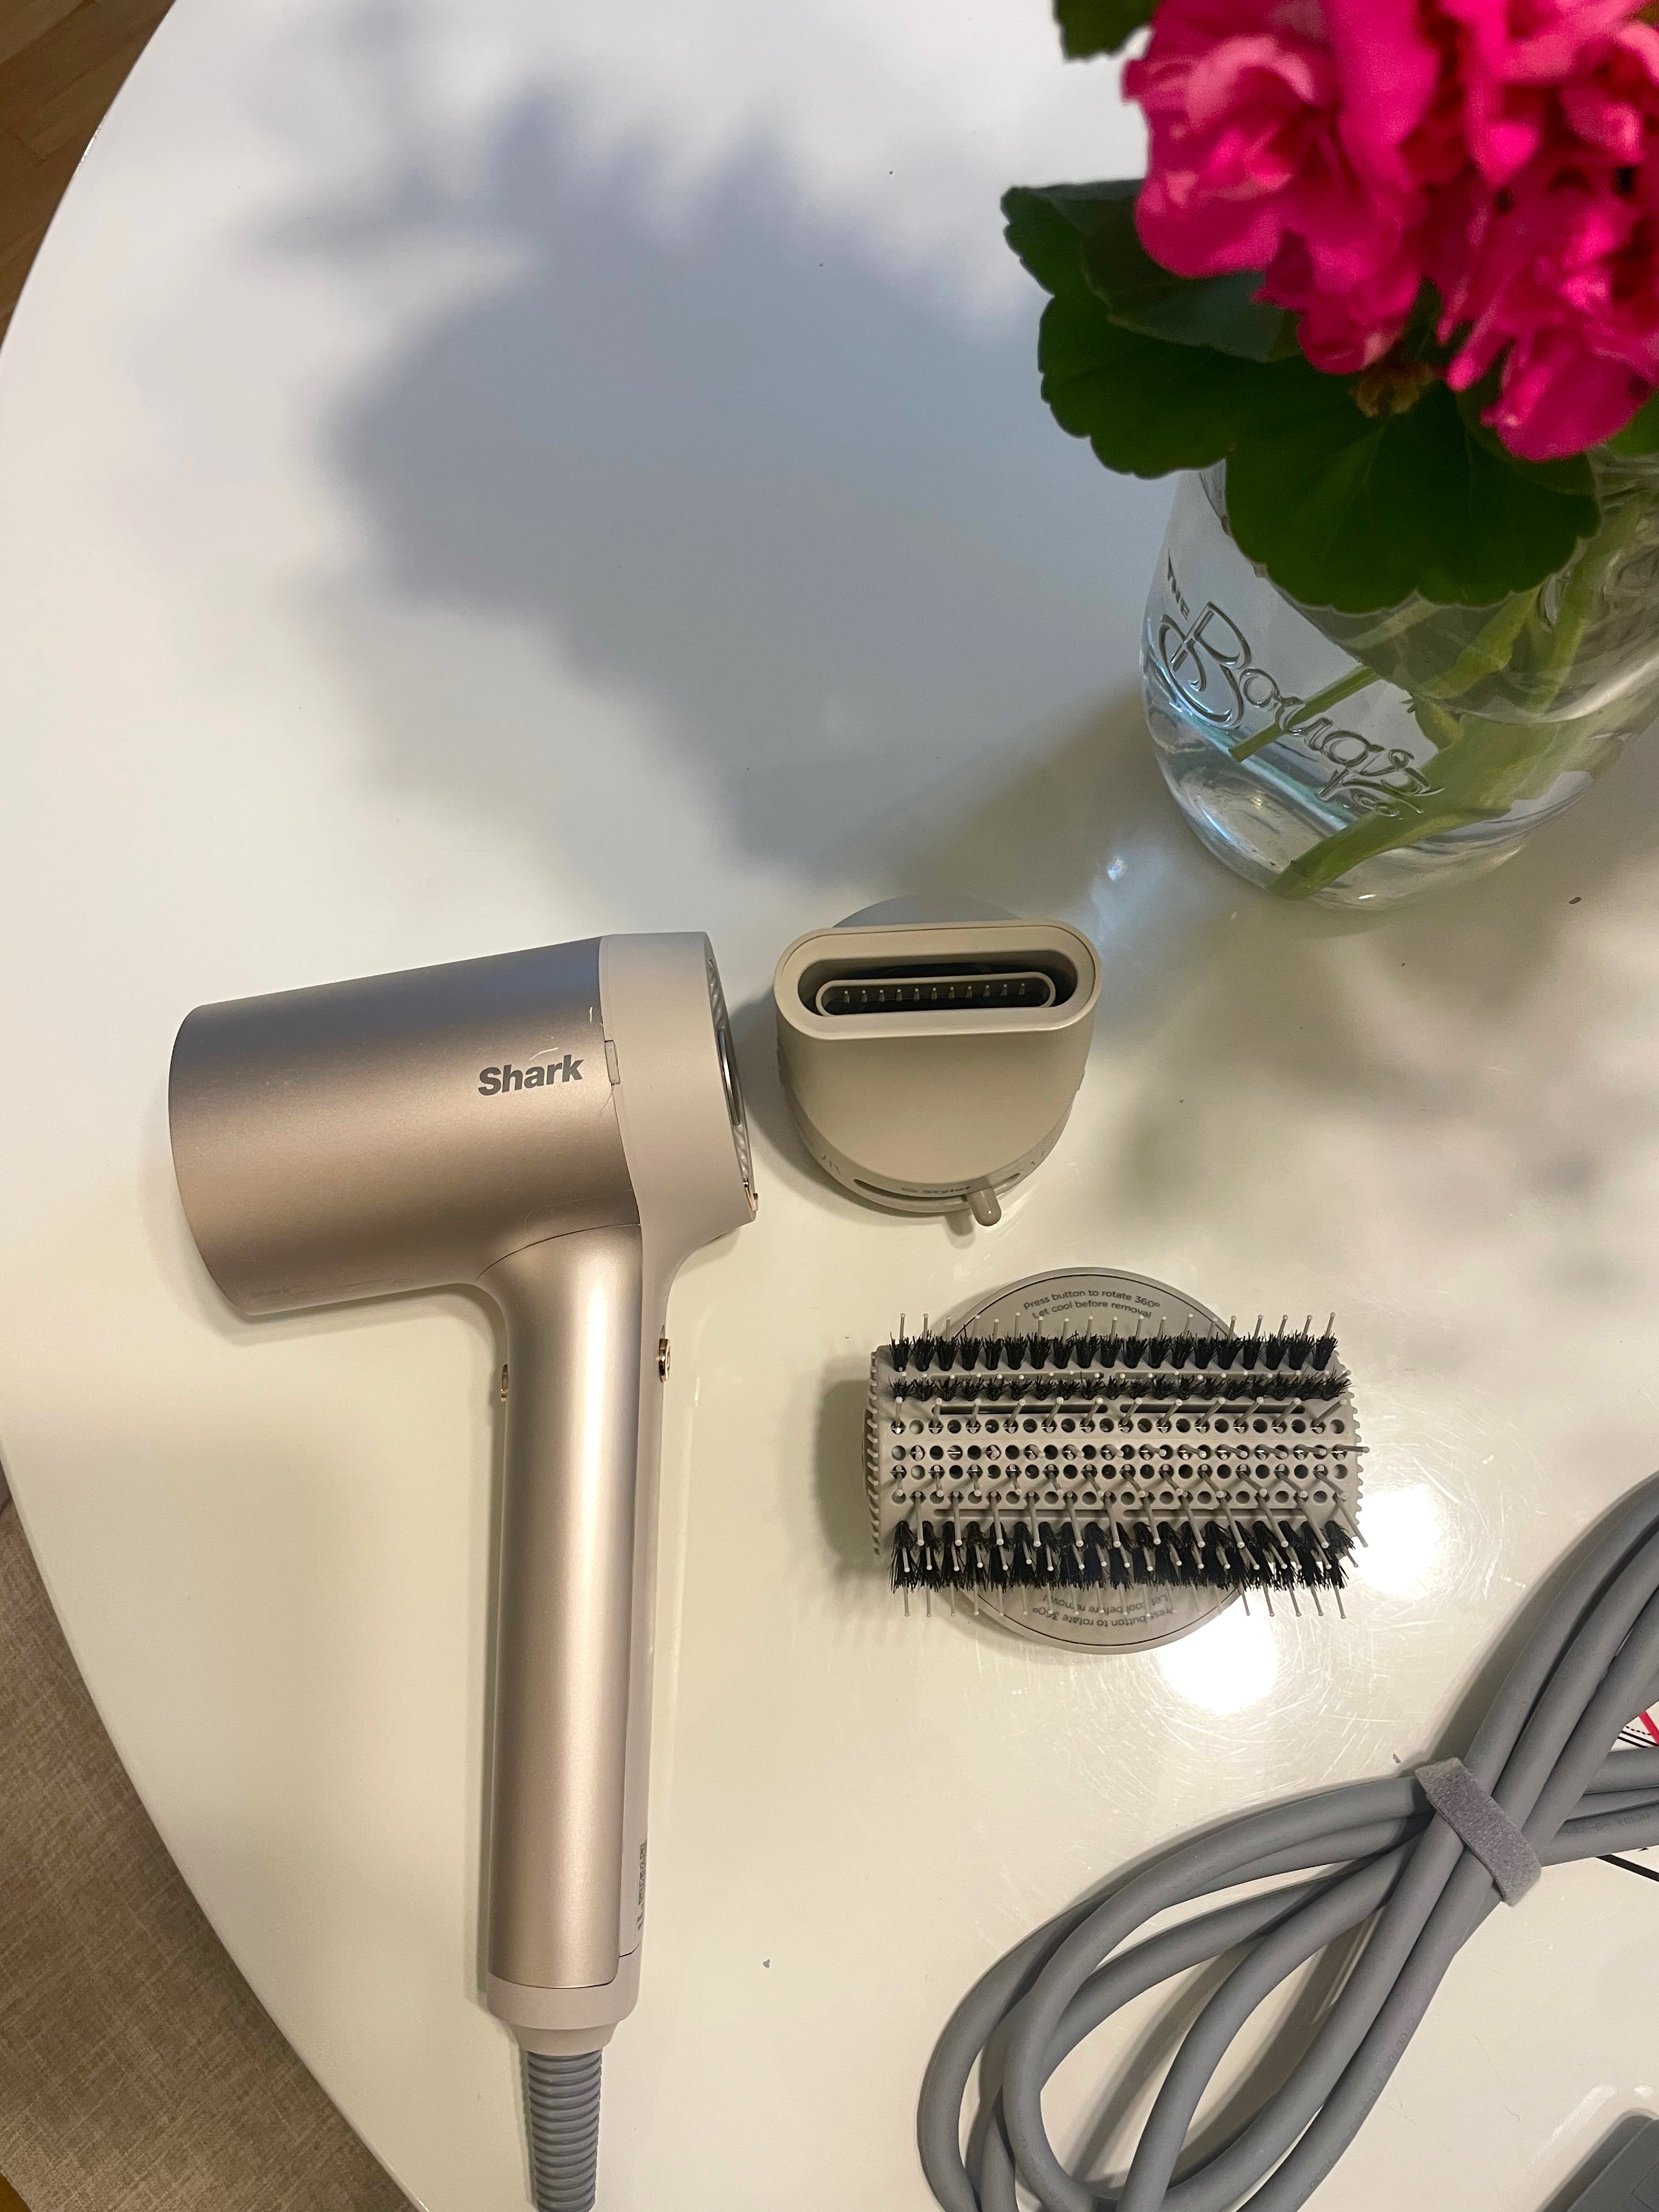 Shark Hair Dryer Review - Is it worth it? - Lizzie in Lace